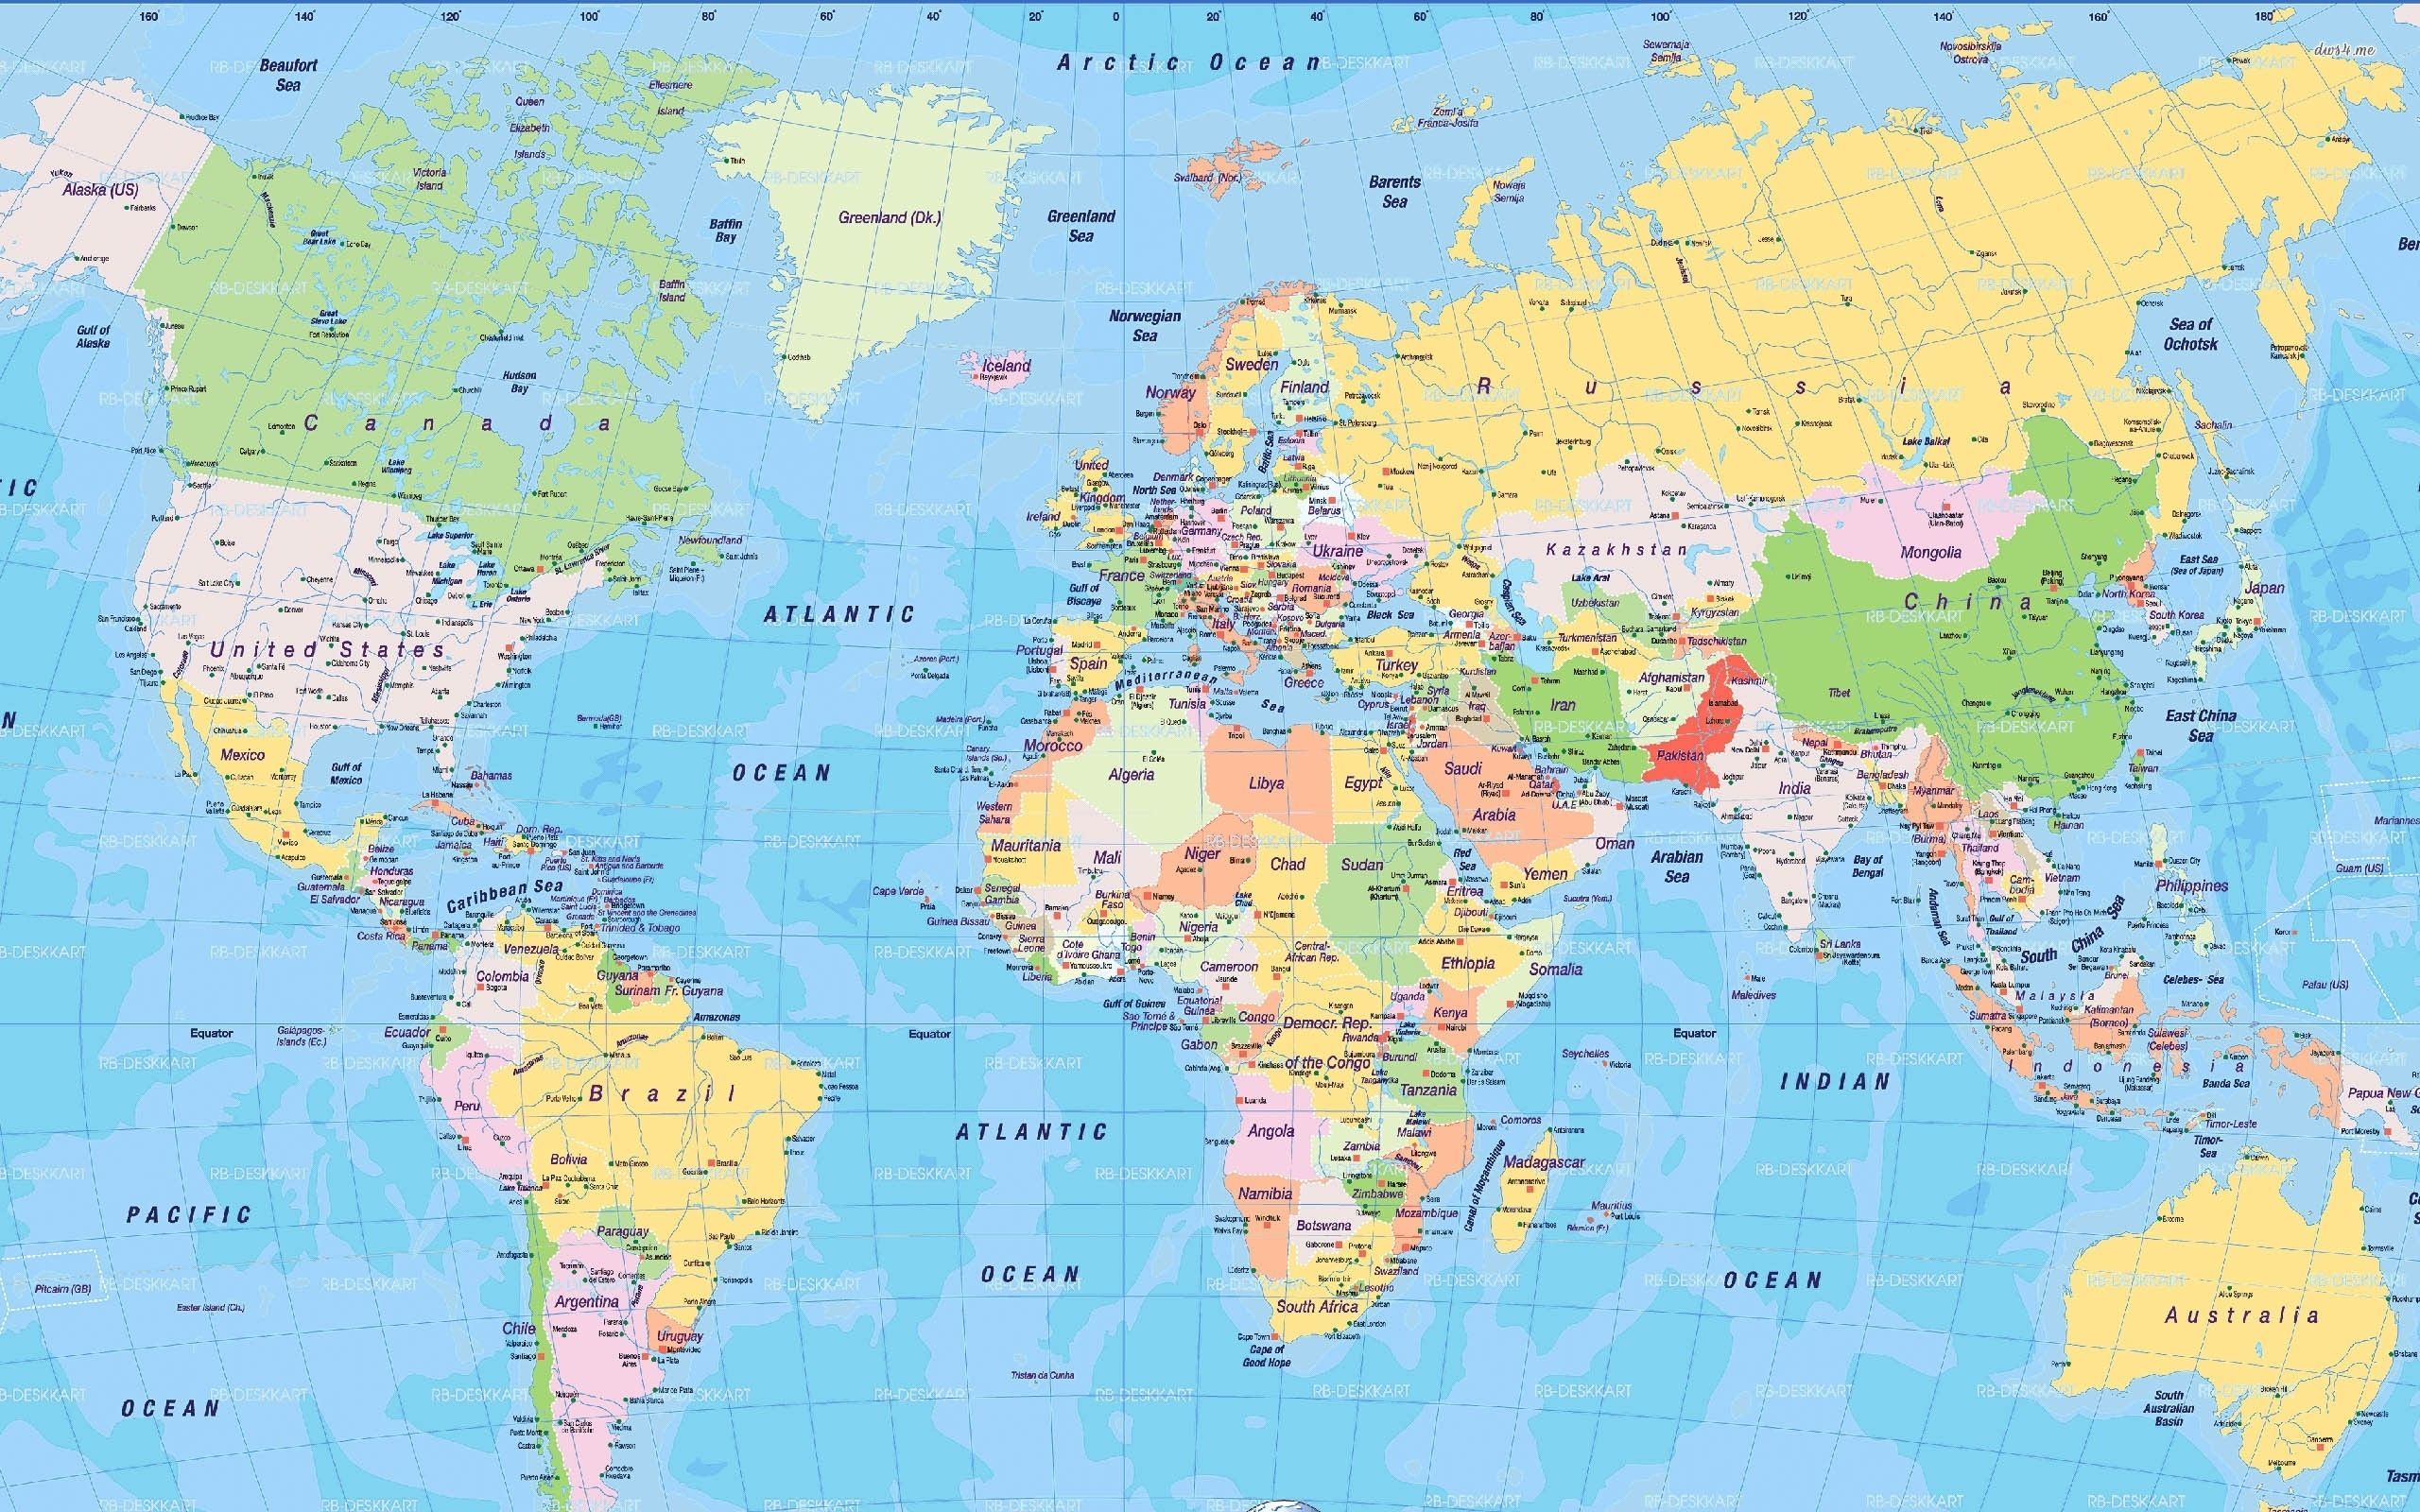 All Inclusive 3D World Map HD Wallpaper Us Time Zone Map Wallpaper Wold Map HD Download World Map In HD Labele. World map wallpaper, Map wallpaper, Cool world map